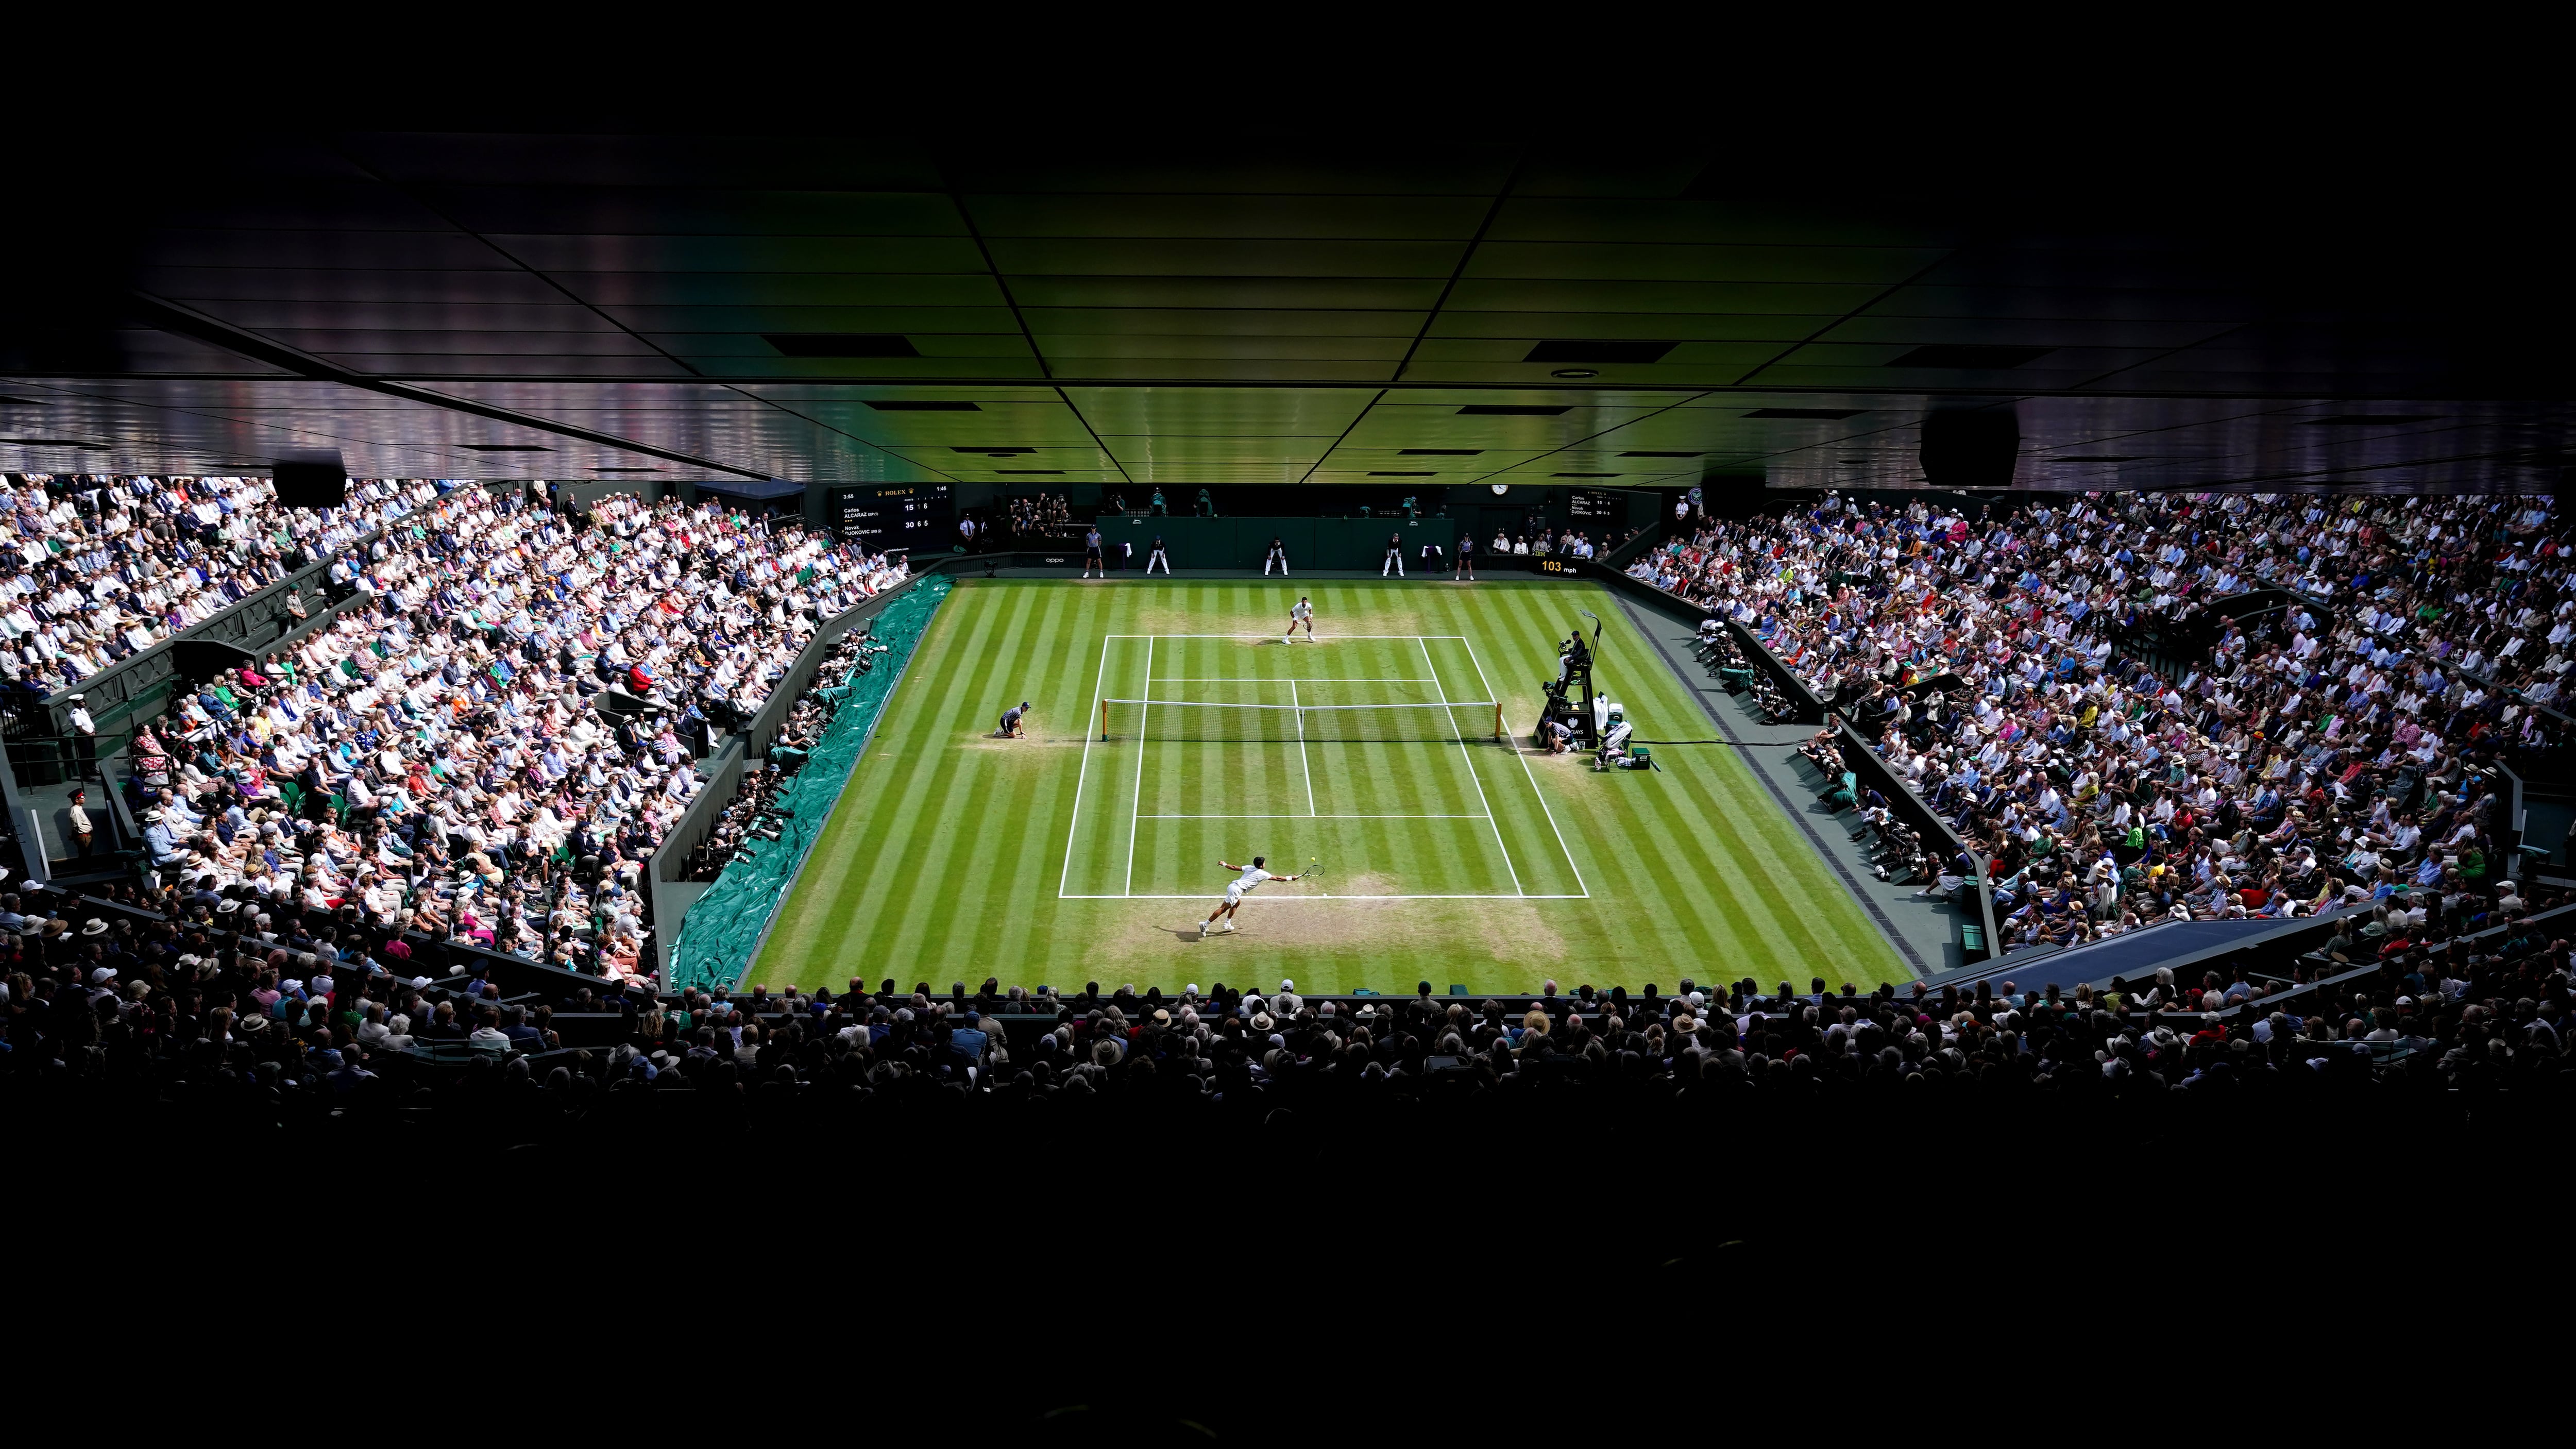 The All England Lawn Tennis Club called the bank an ‘important partner’